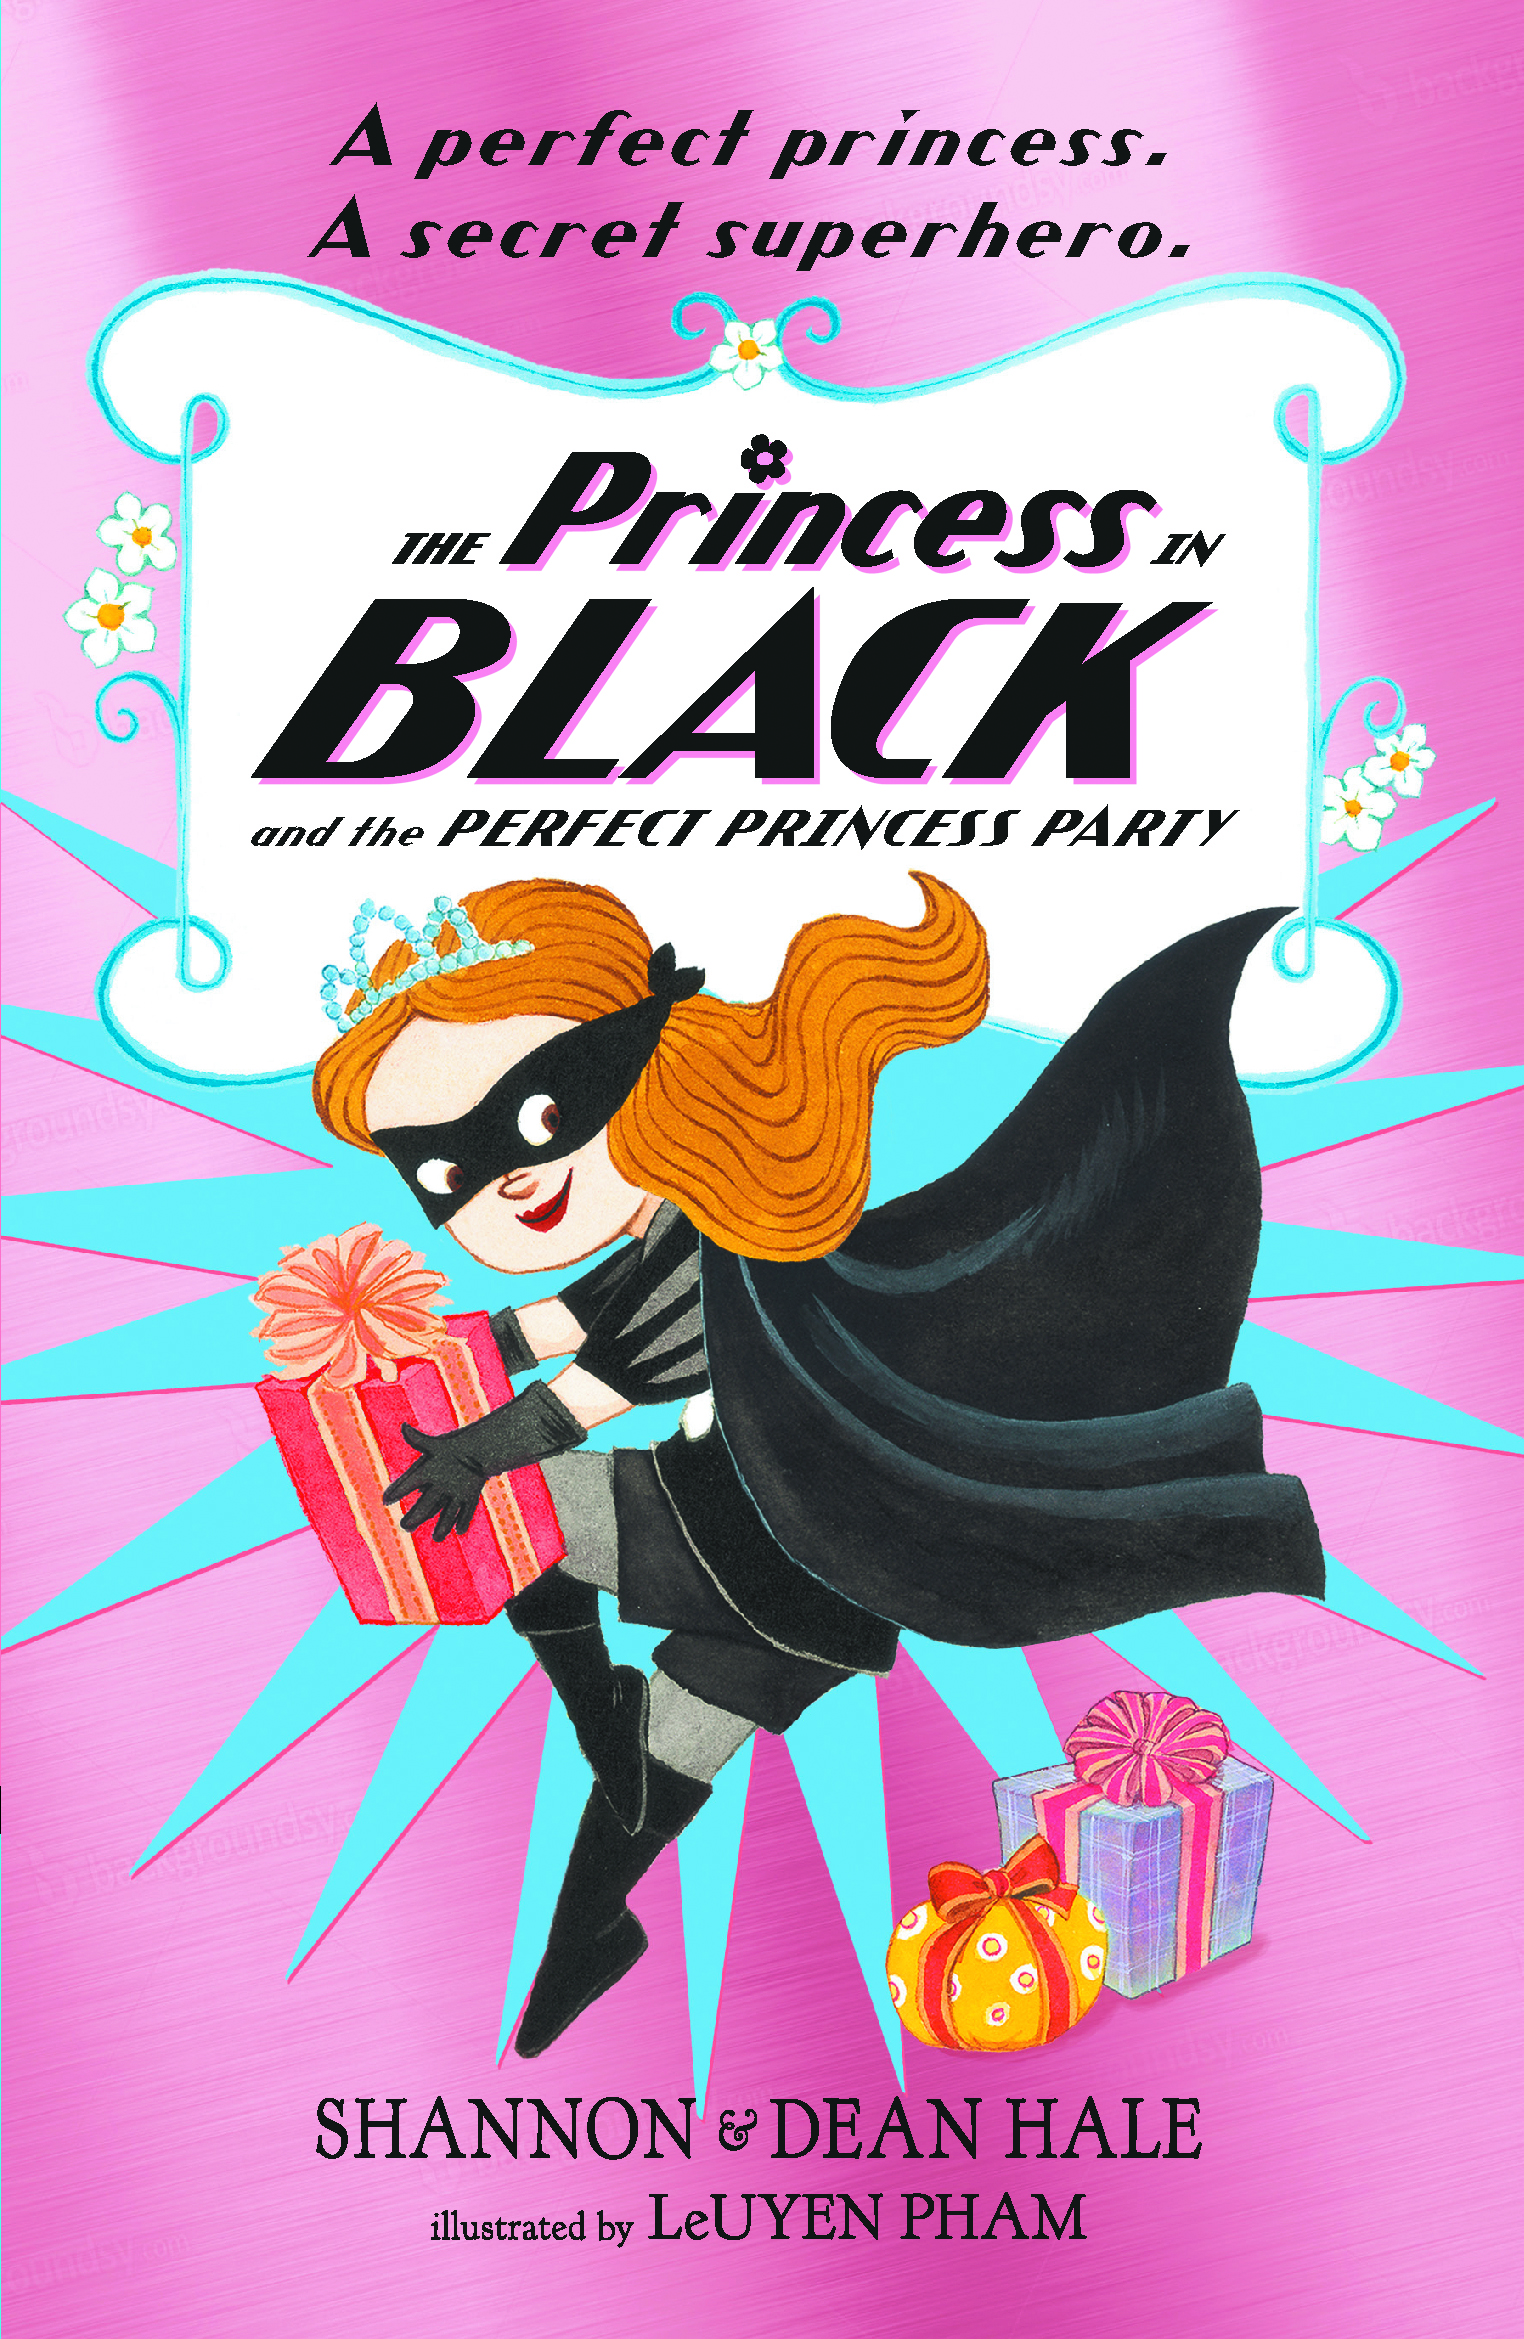 The-Princess-in-Black-and-the-Perfect-Princess-Party